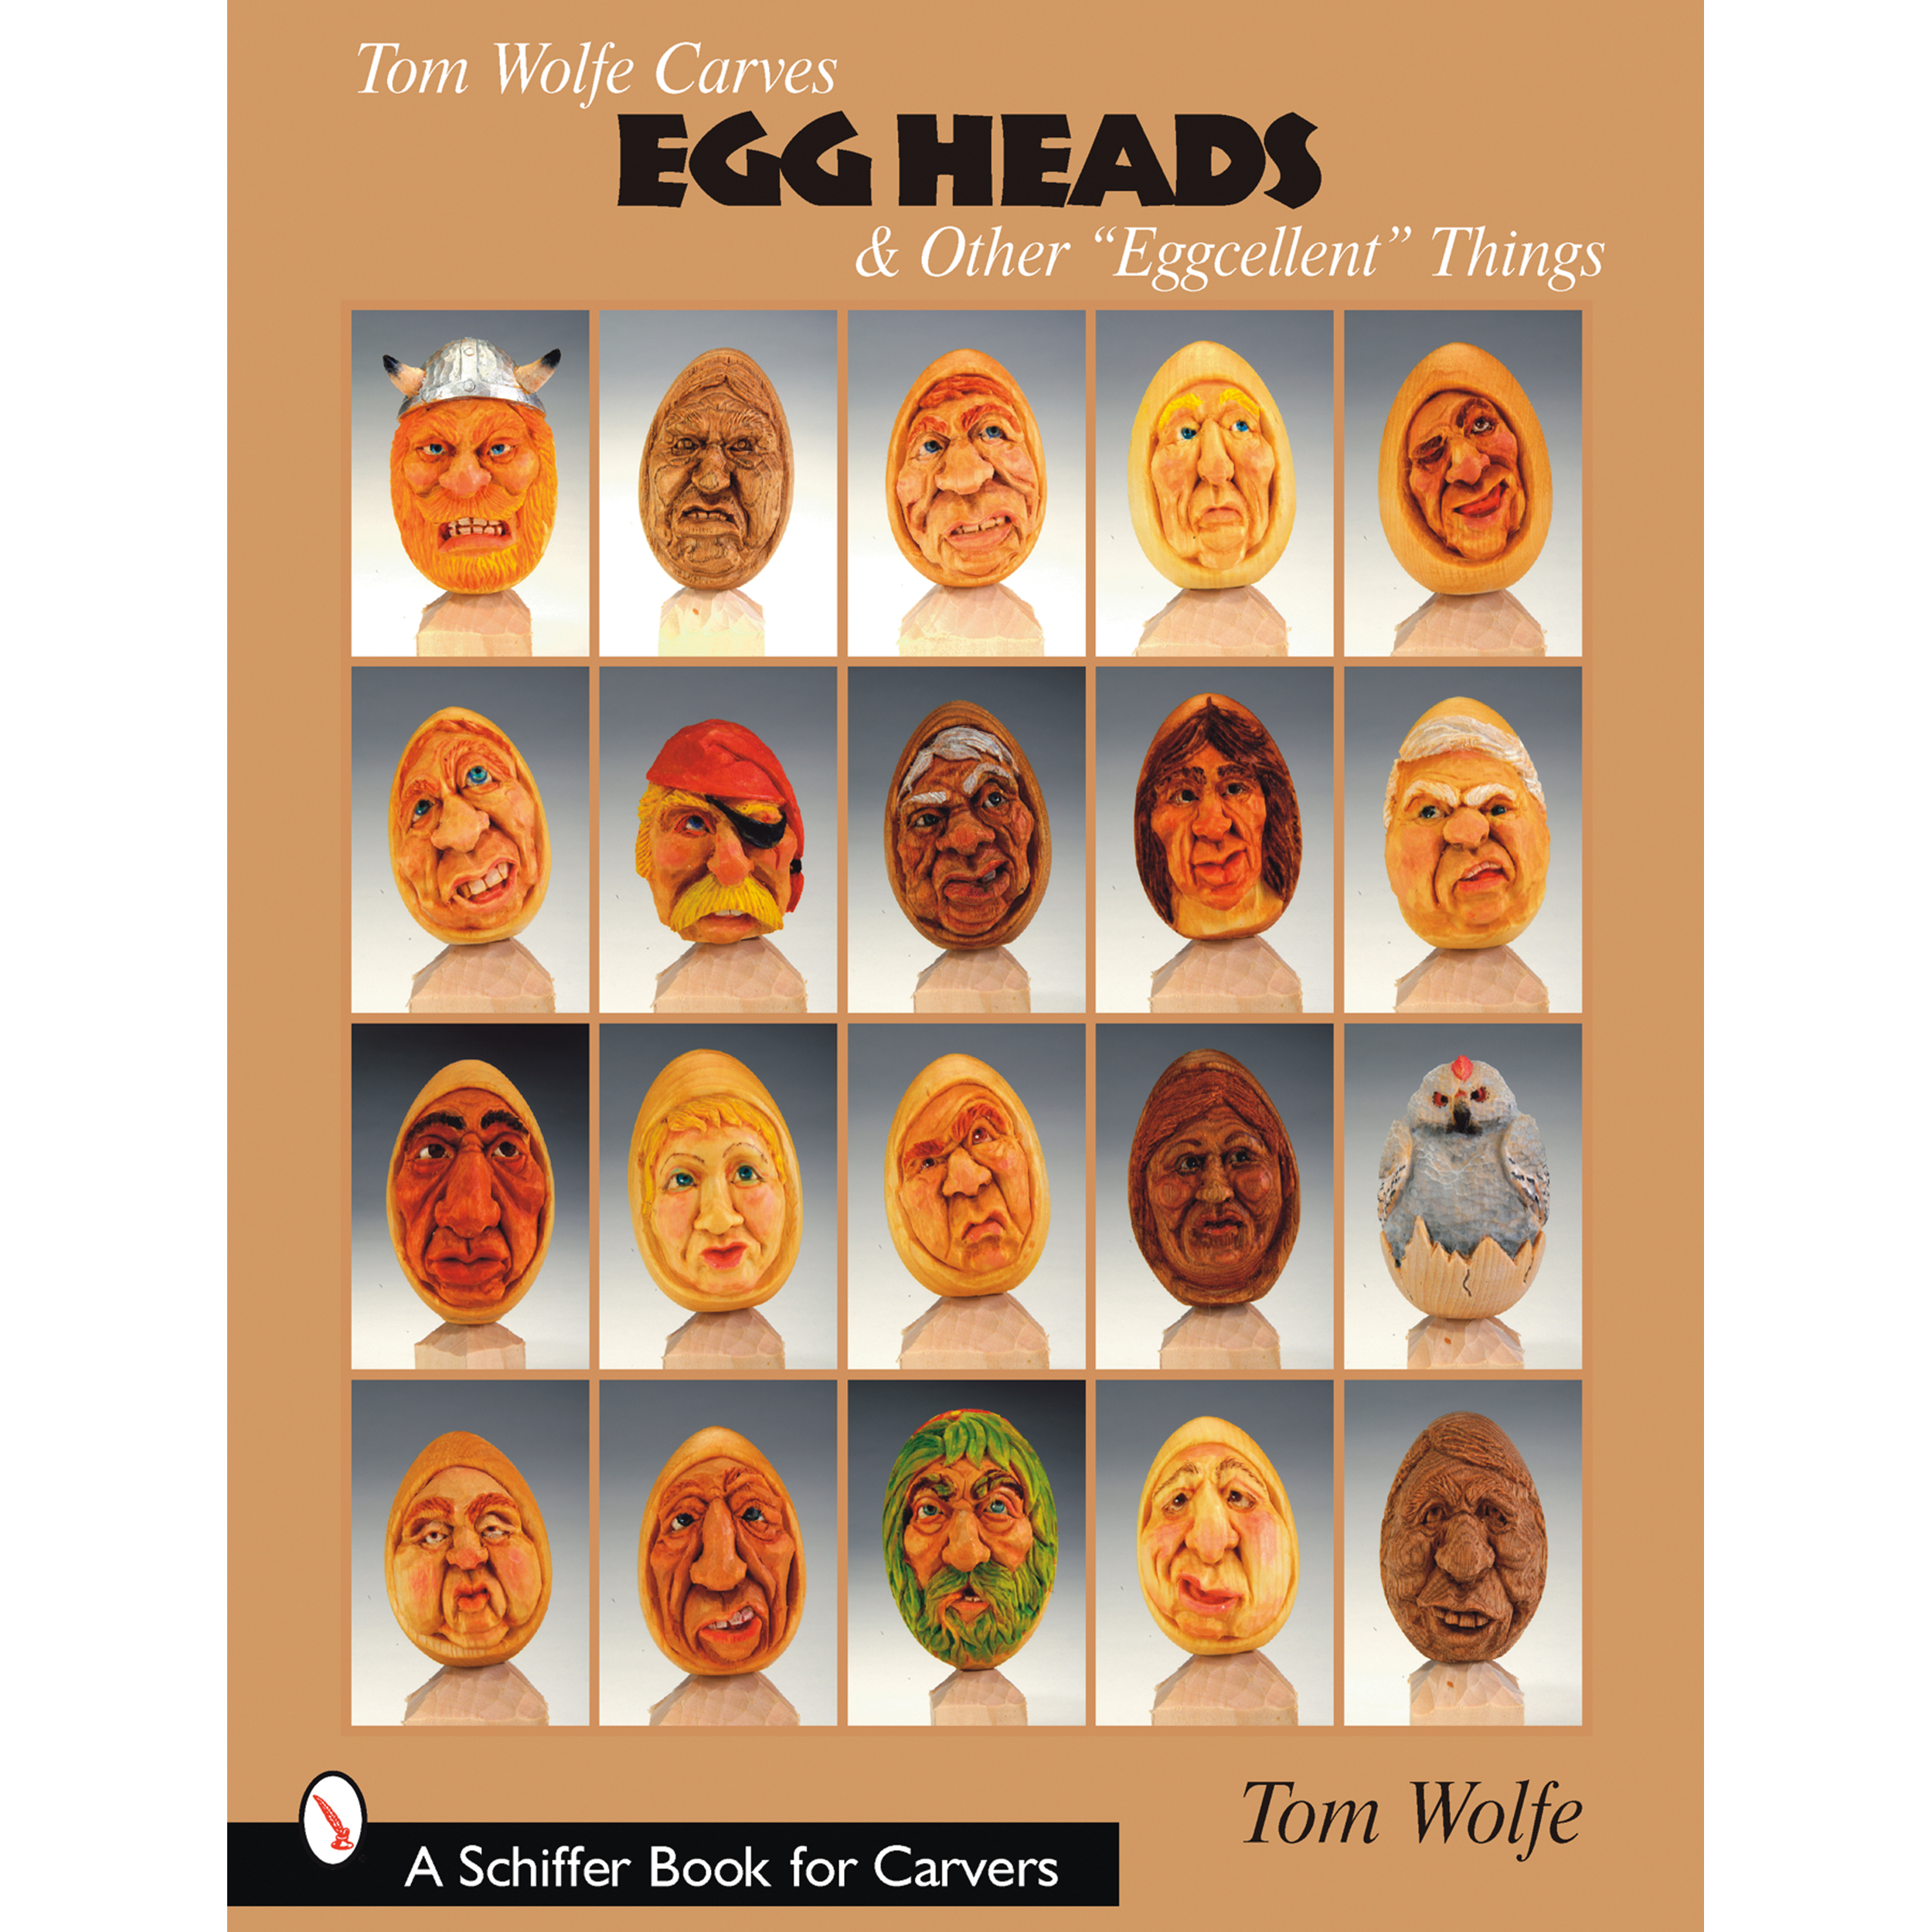 Tom Wolfe Carves Egg Heads And Other "eggcellent" Things